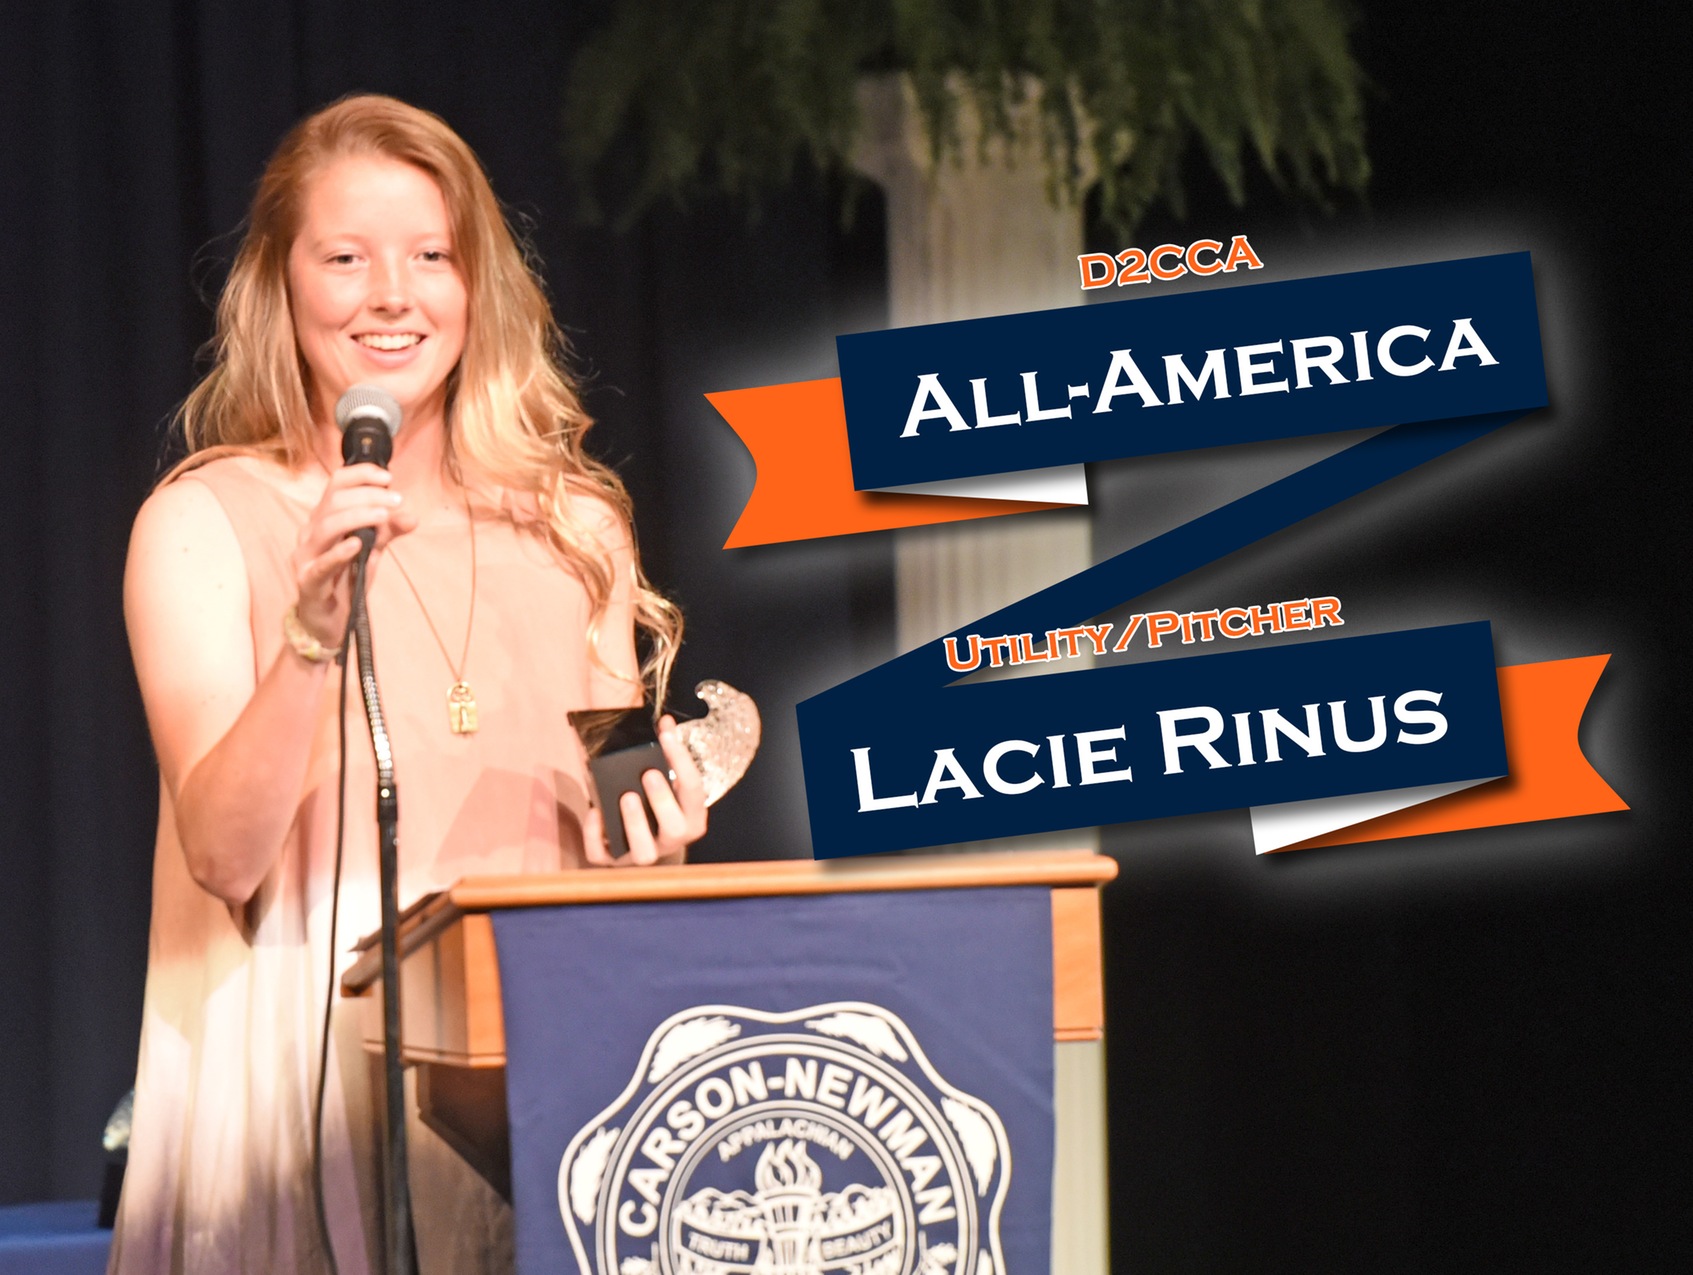 Rinus, Fiessinger snag All-America honors from D2CCA